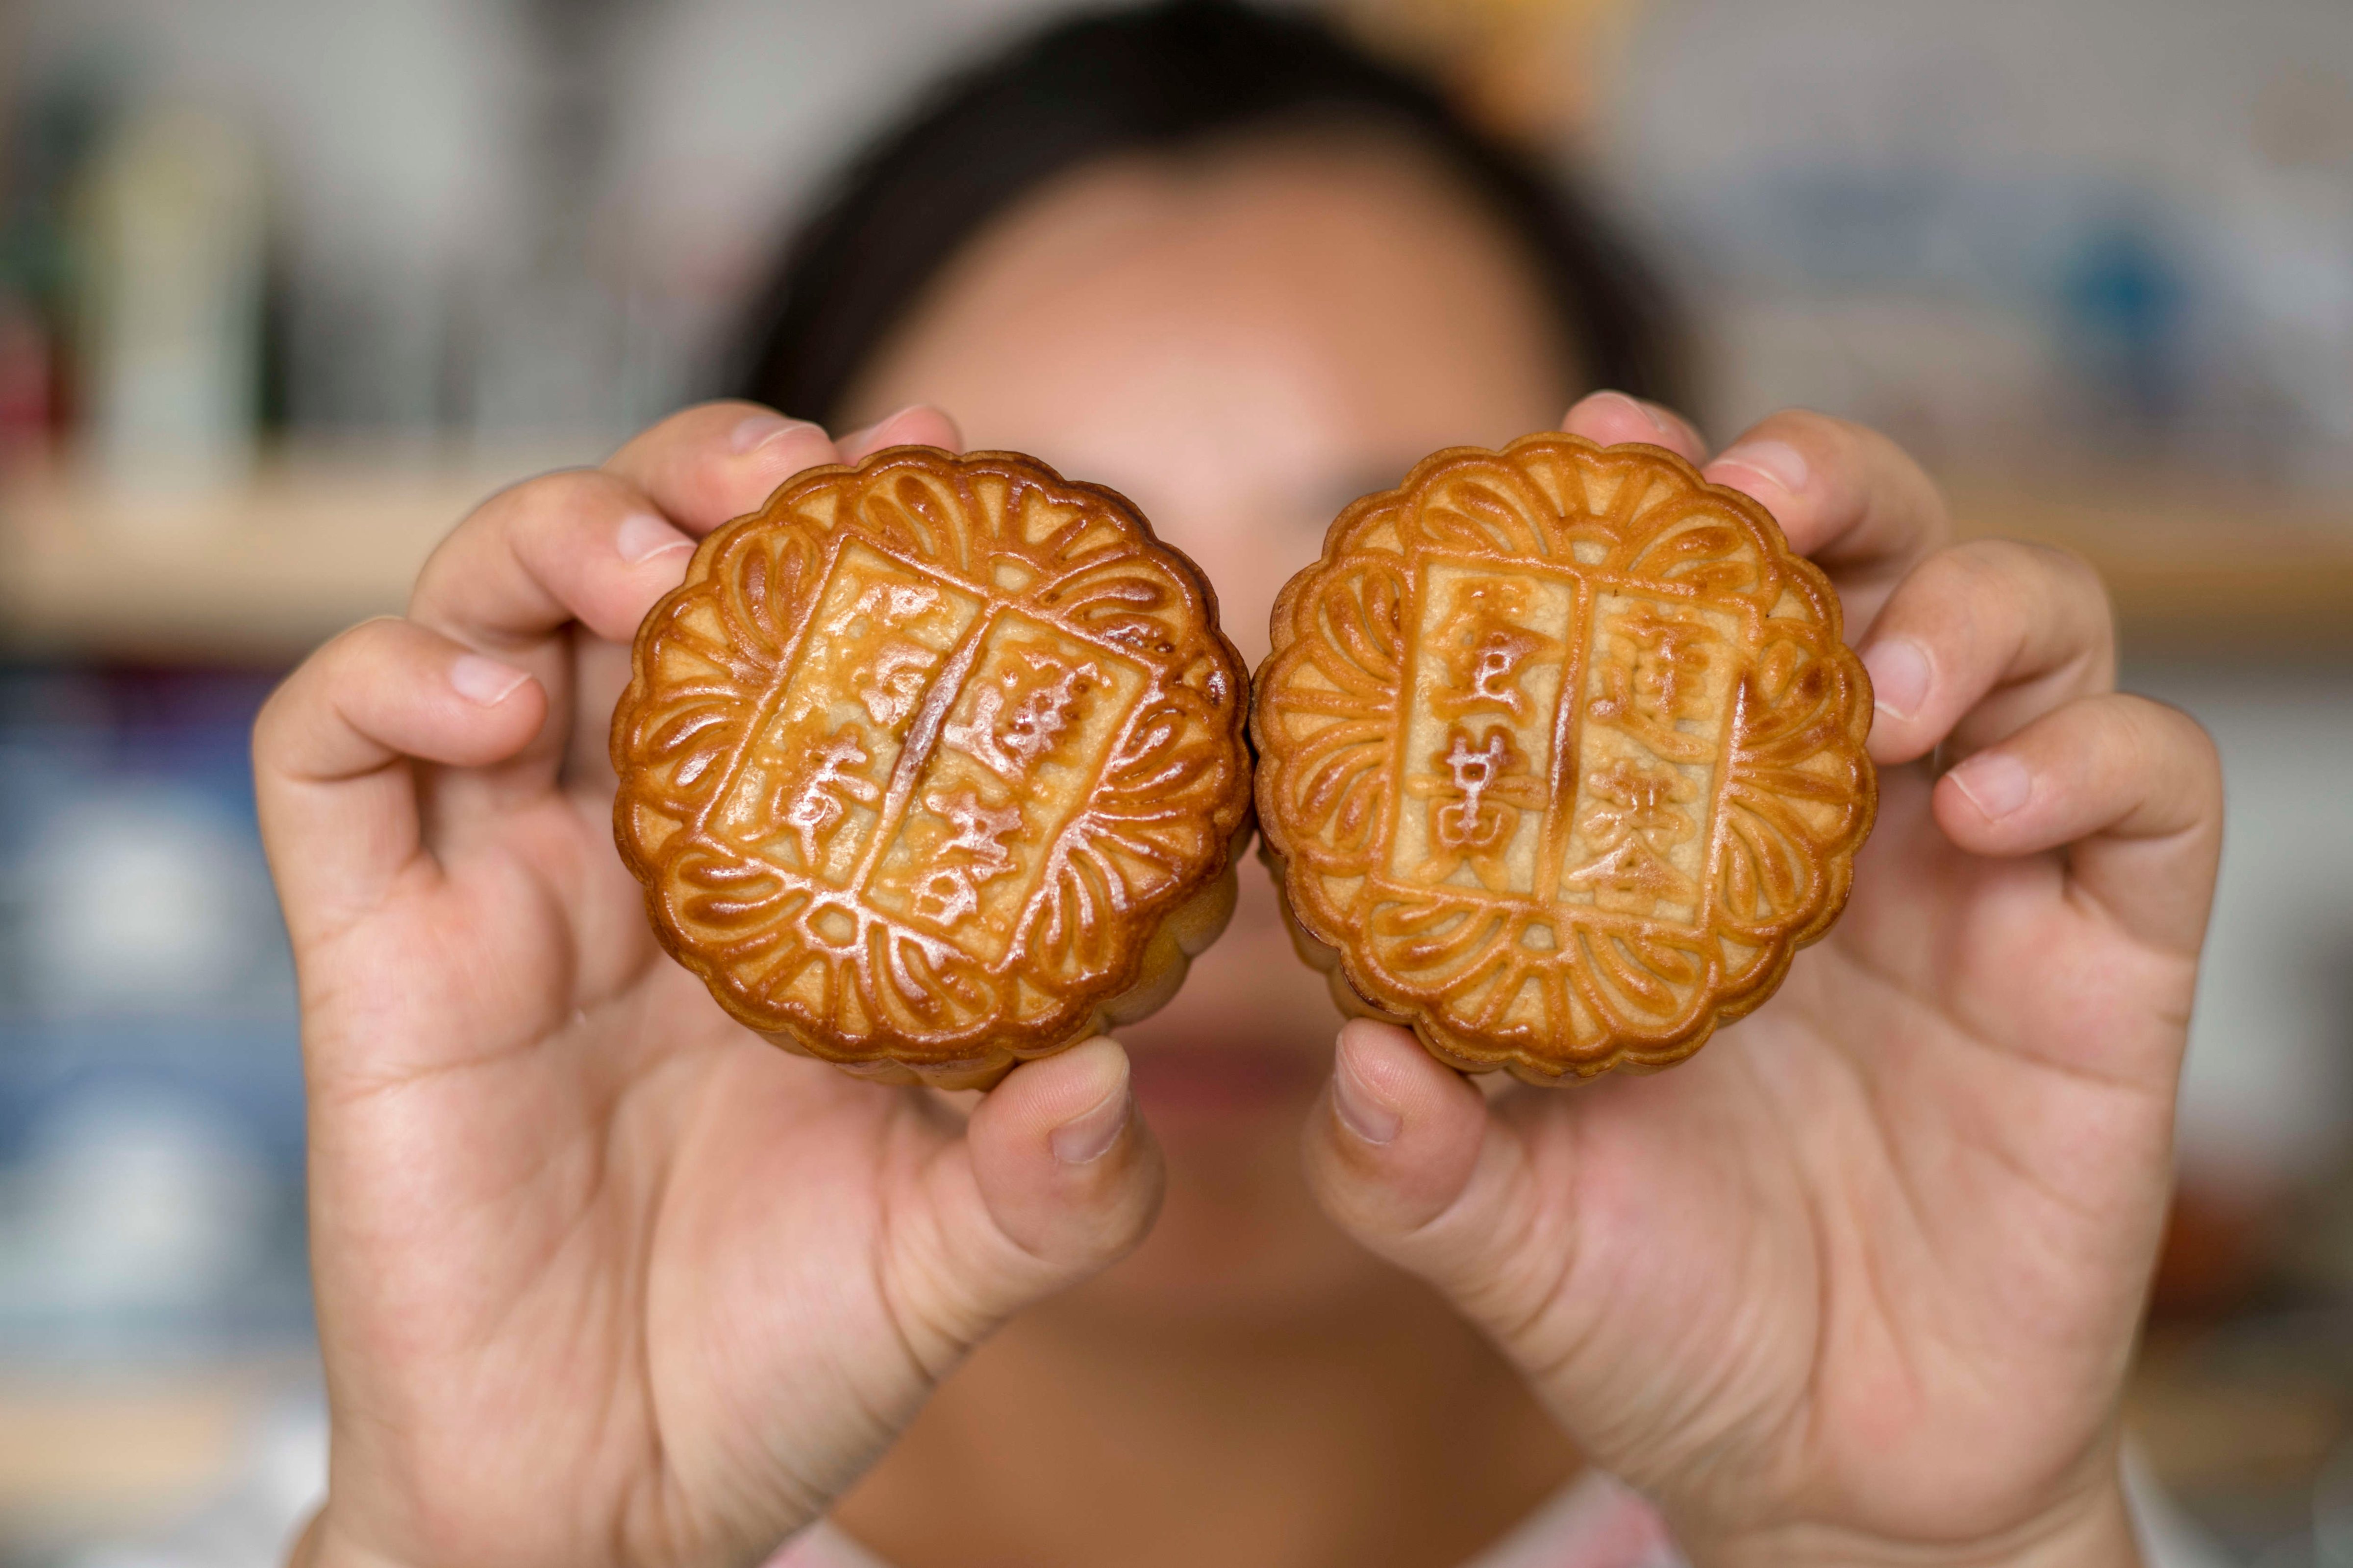 A woman in Beijing is holding moon cakes in her hands on Sept. 10, 2016 (Zhang Peng—LightRocket/Getty Images)